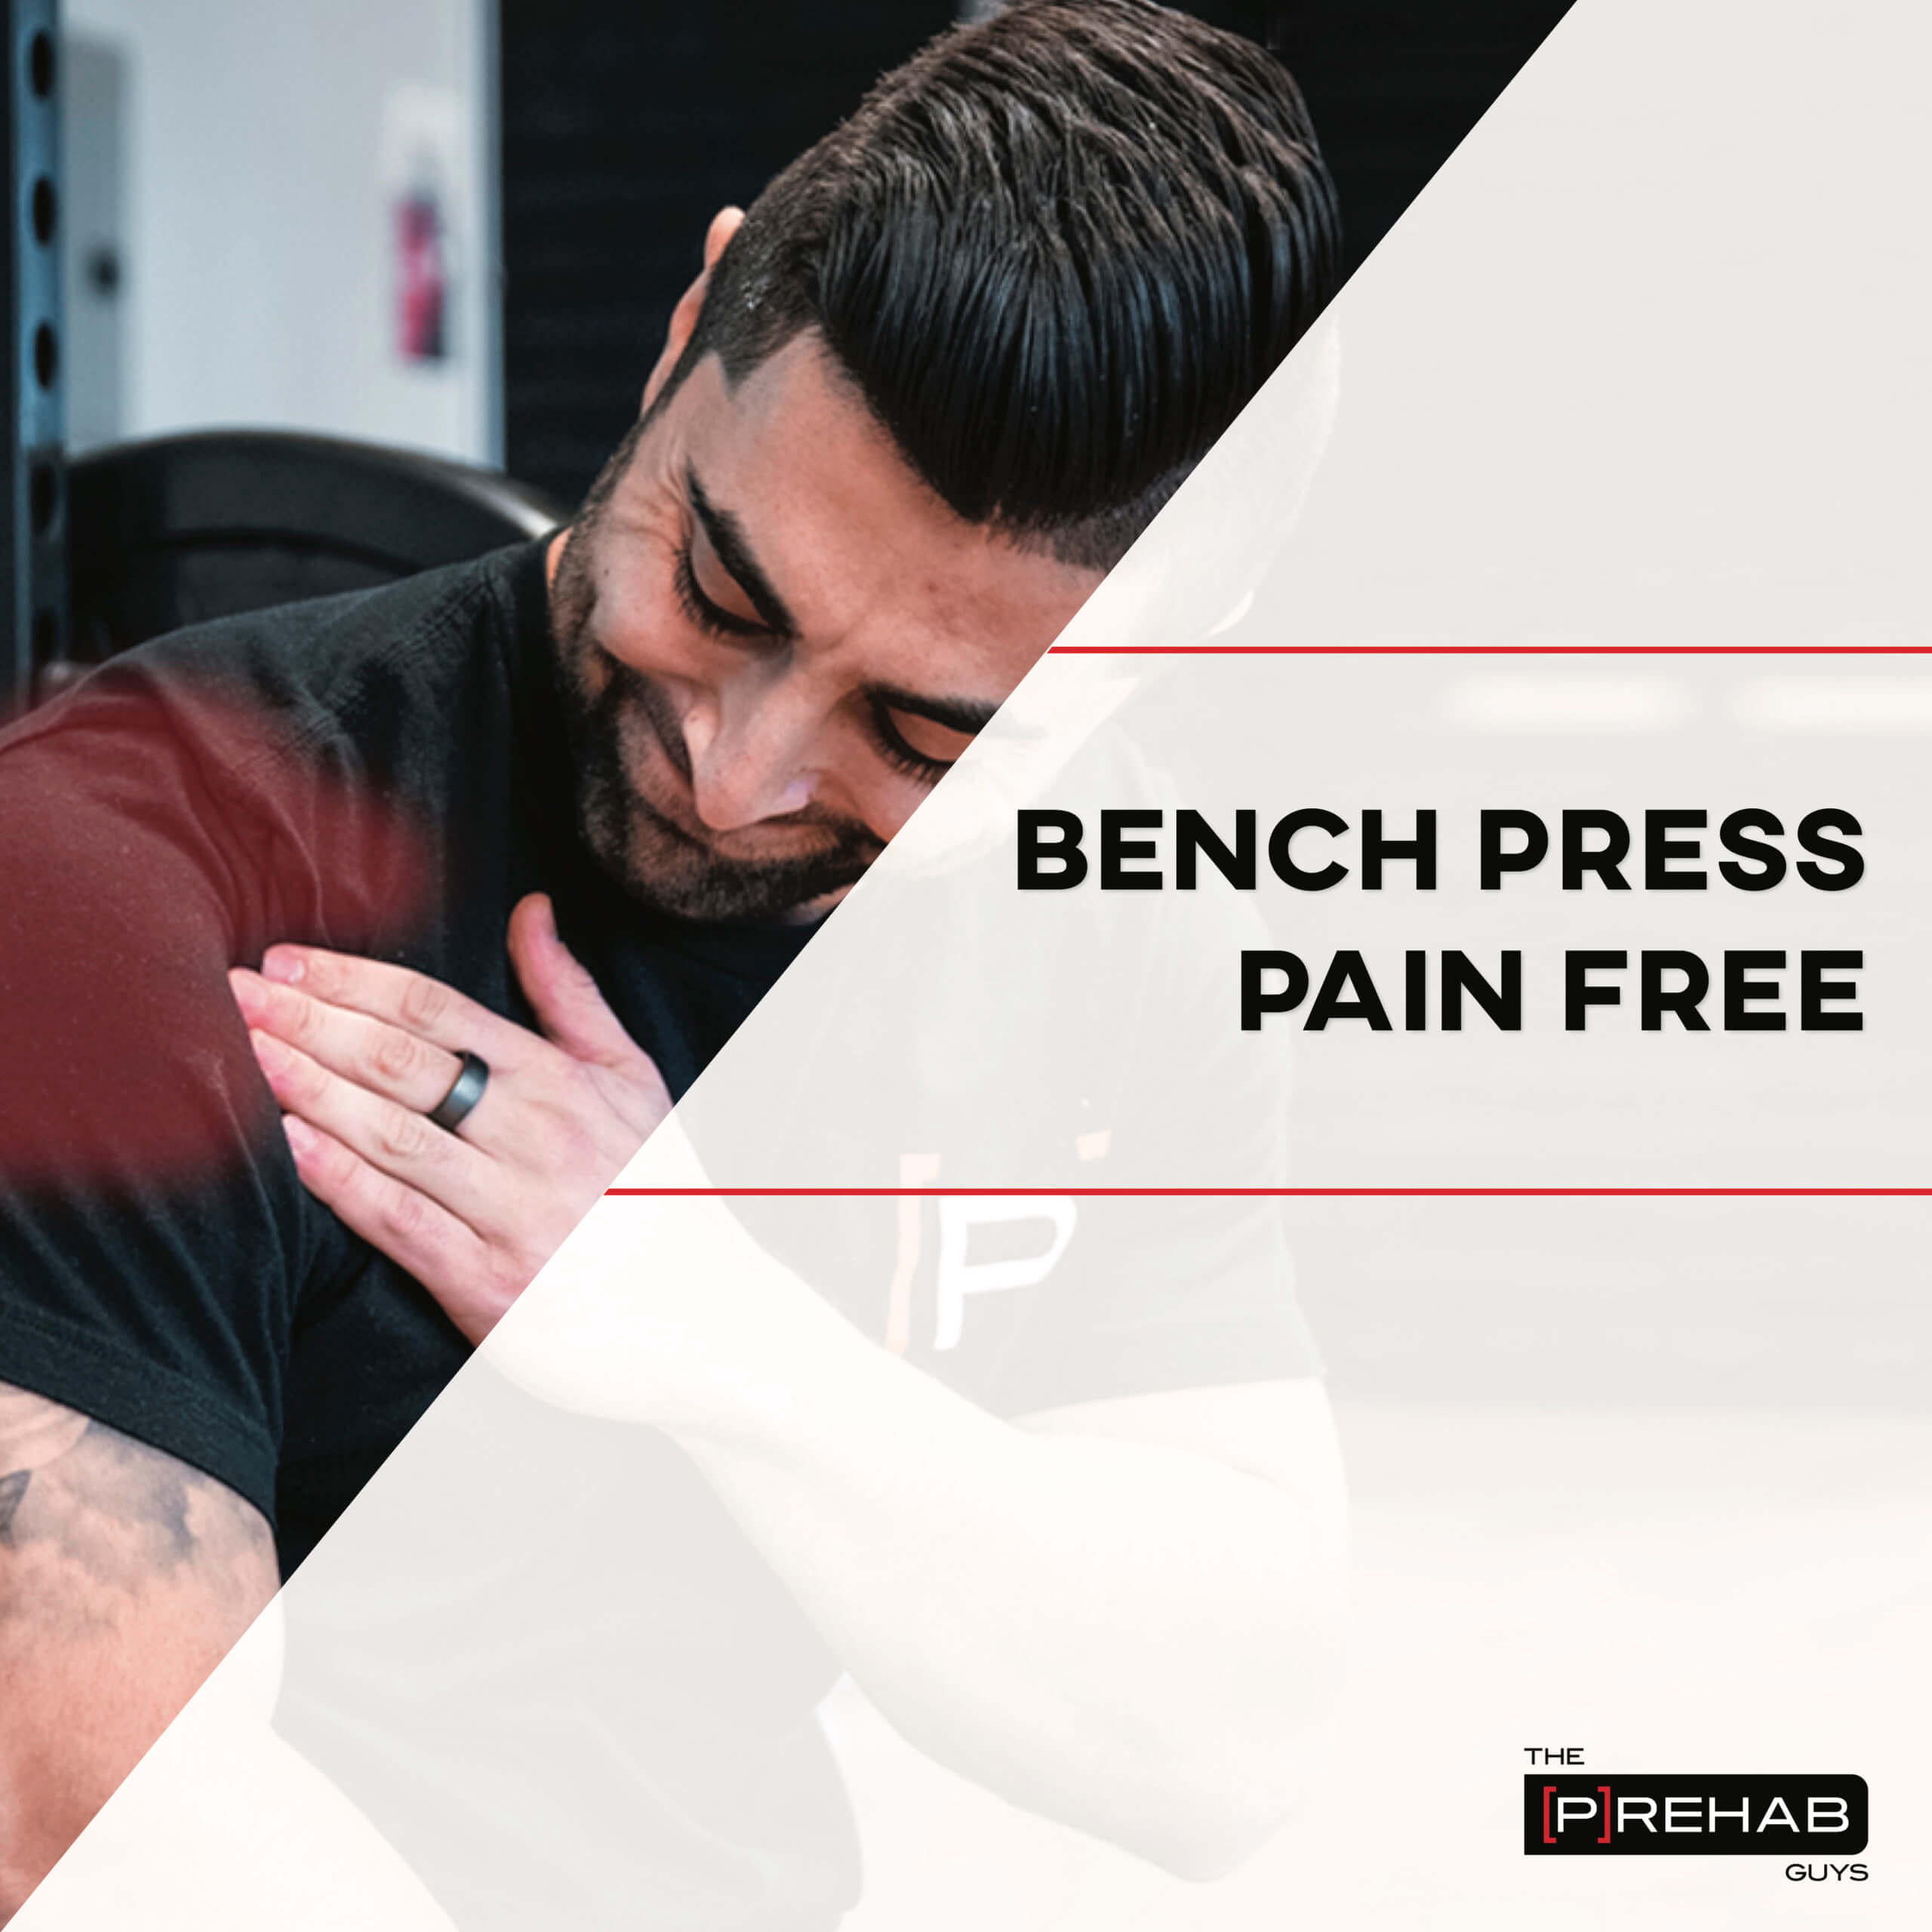 bench press pain free gain muscle without injury the prehab guys